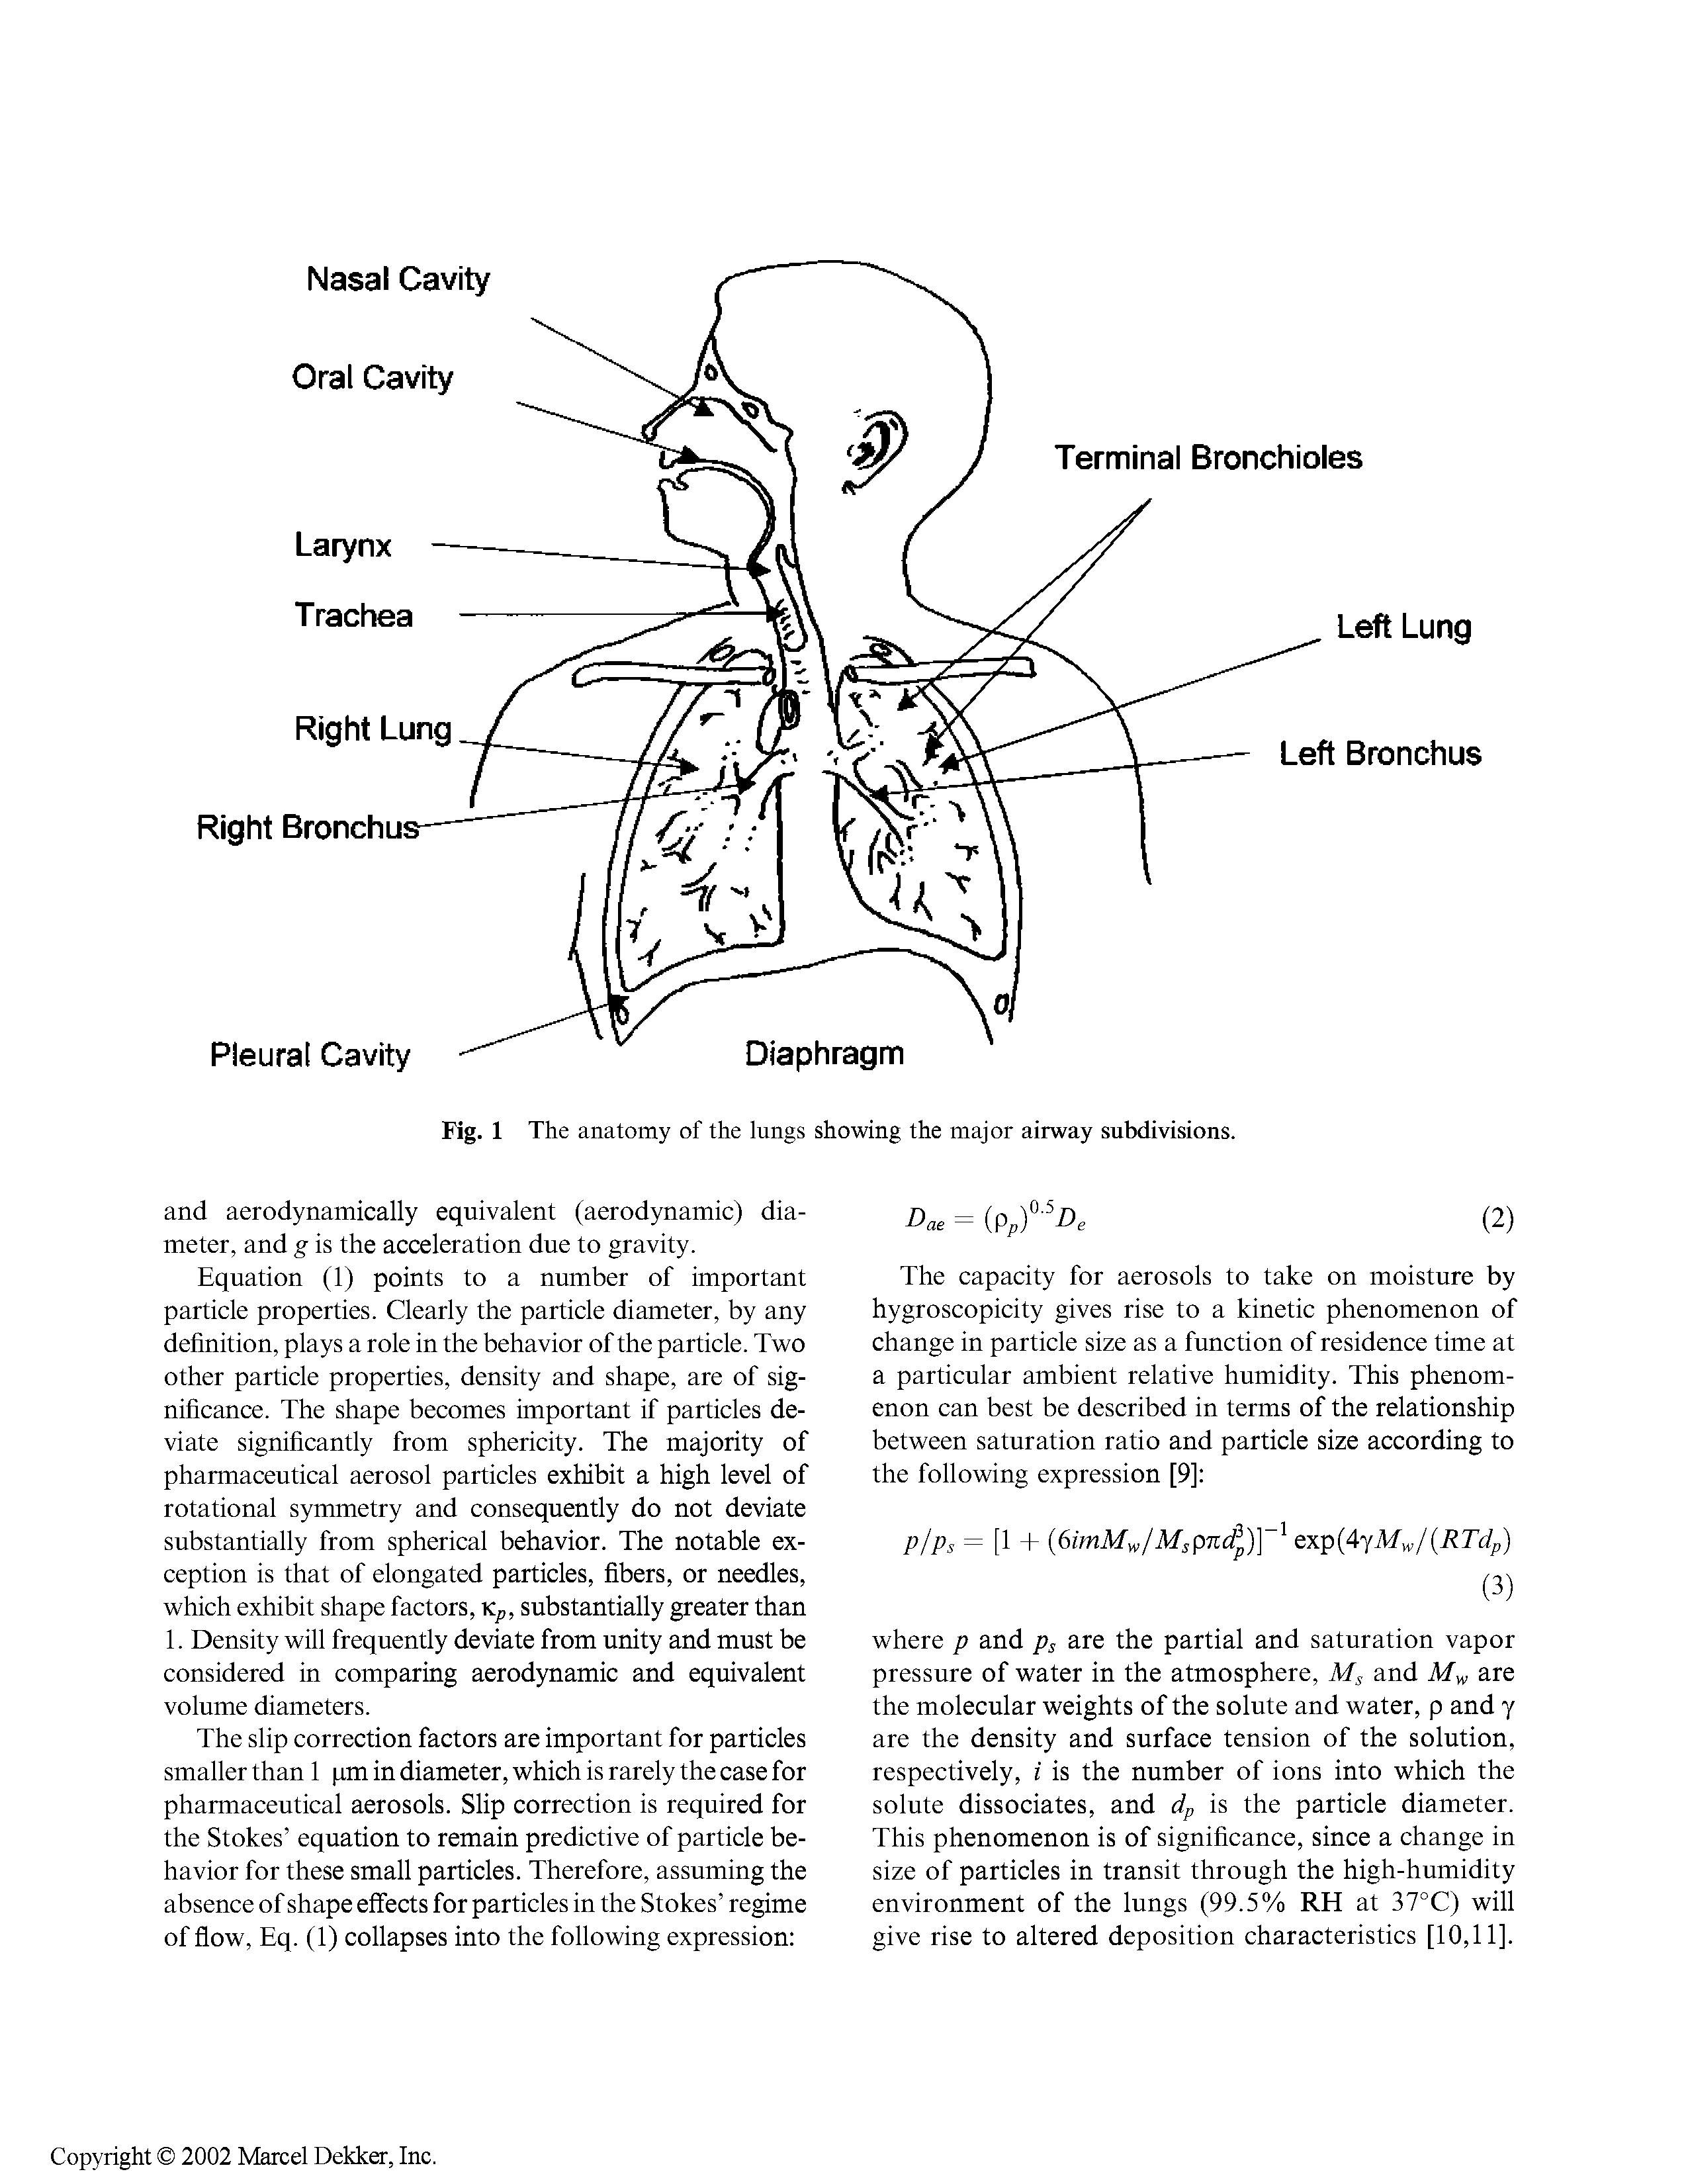 Fig. 1 The anatomy of the lungs showing the major airway subdivisions.